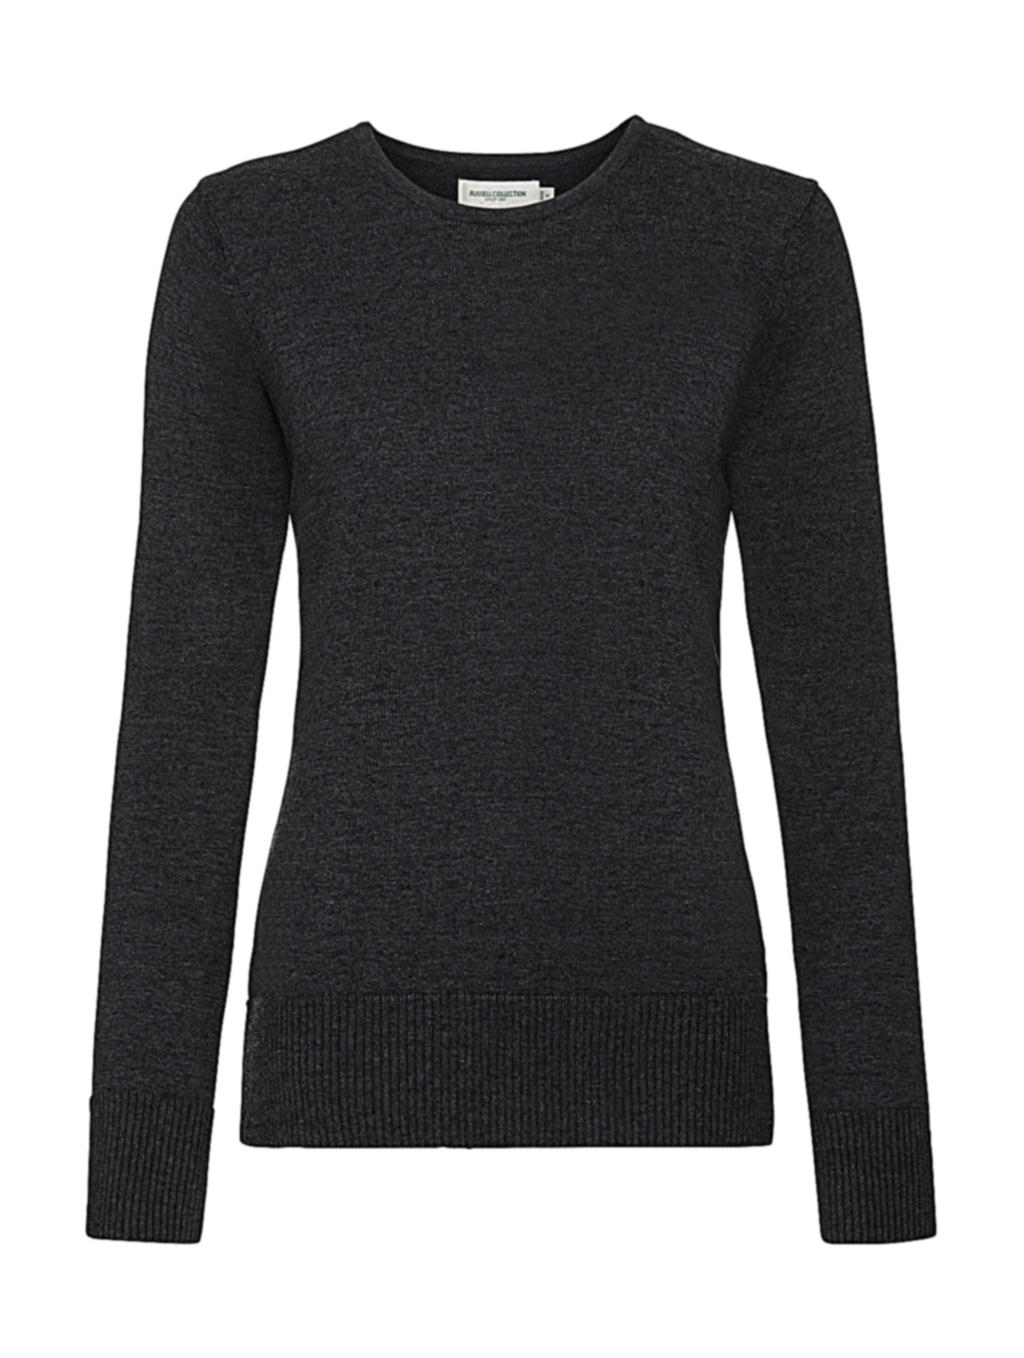  Ladies Crew Neck Knitted Pullover in Farbe Charcoal Marl